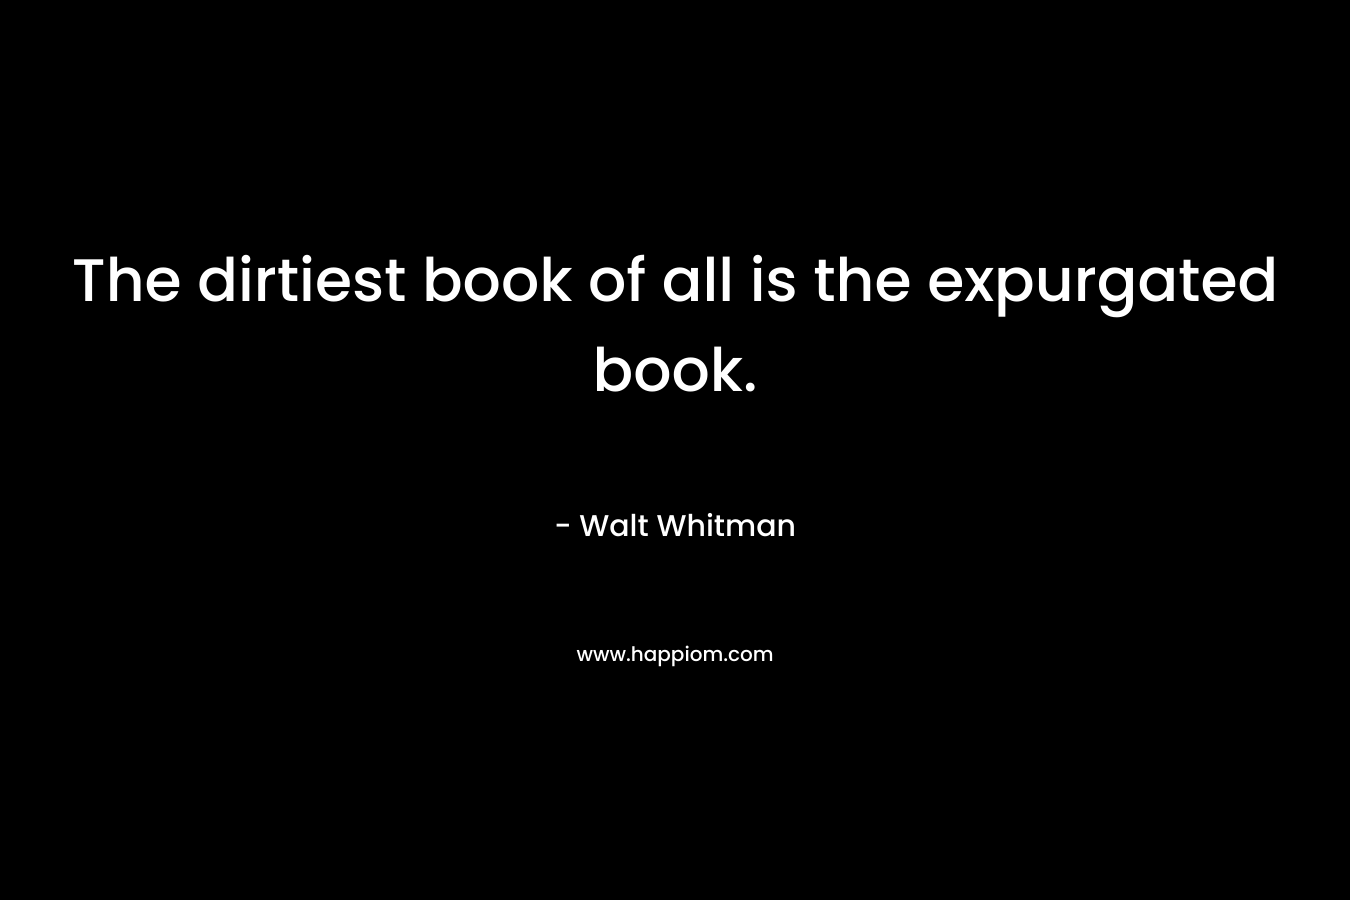 The dirtiest book of all is the expurgated book. – Walt Whitman